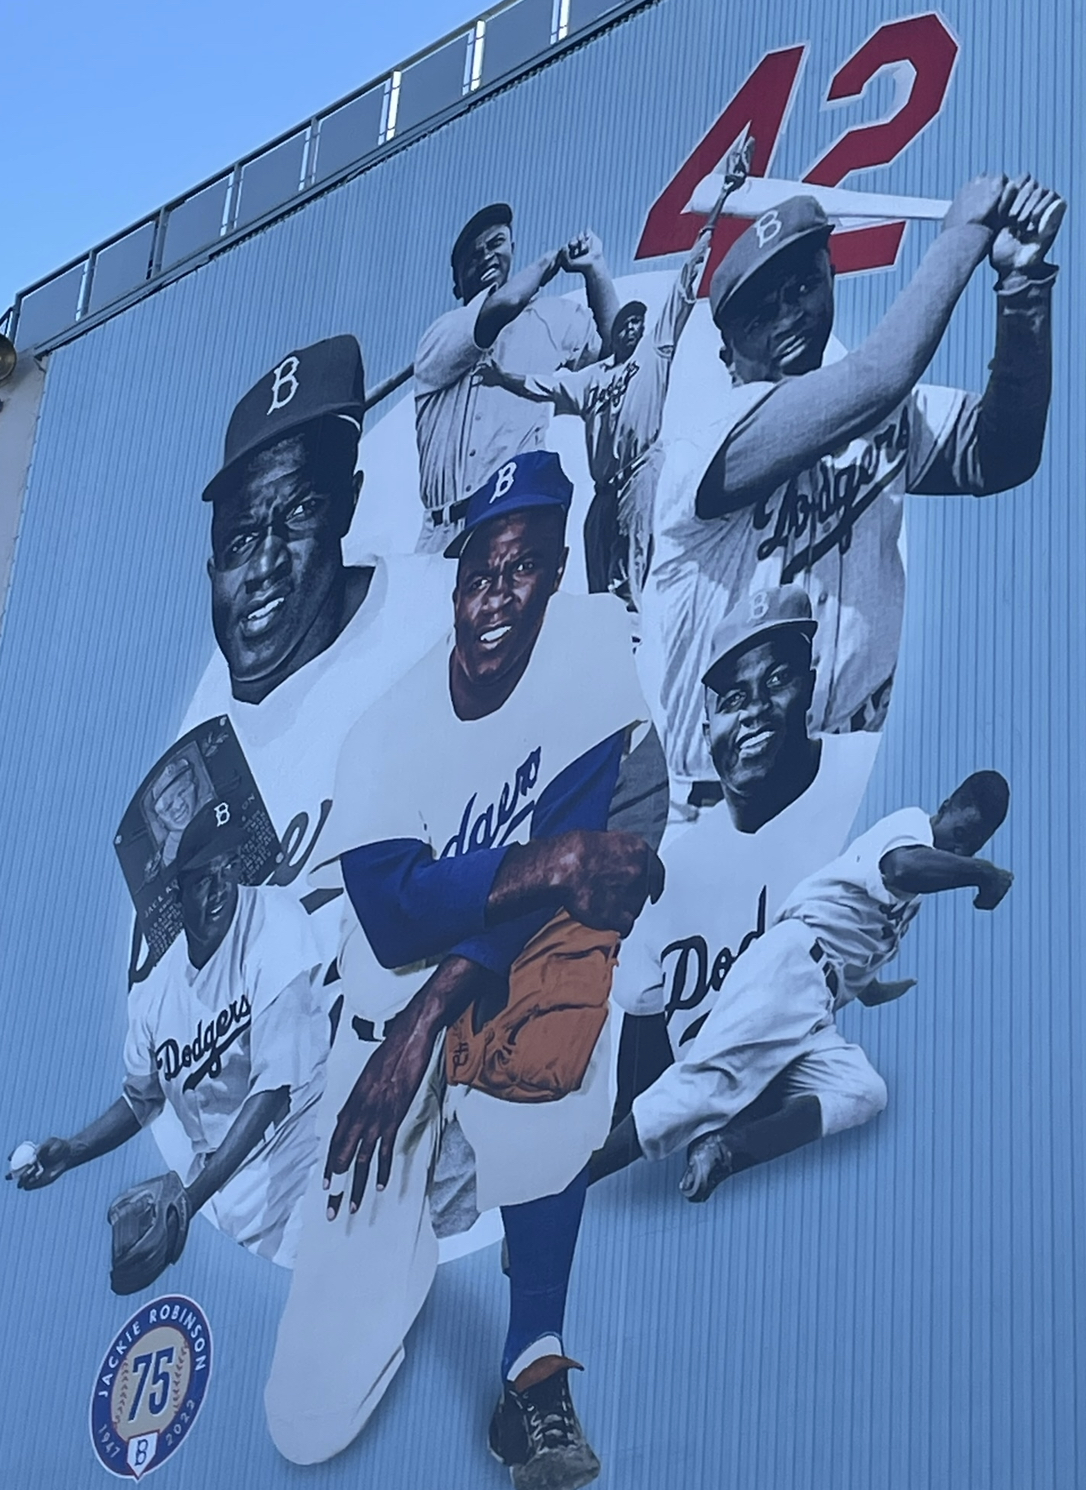 2022 marks 75th anniversary of Jackie Robinson breaking baseball's color  barrier, Sports